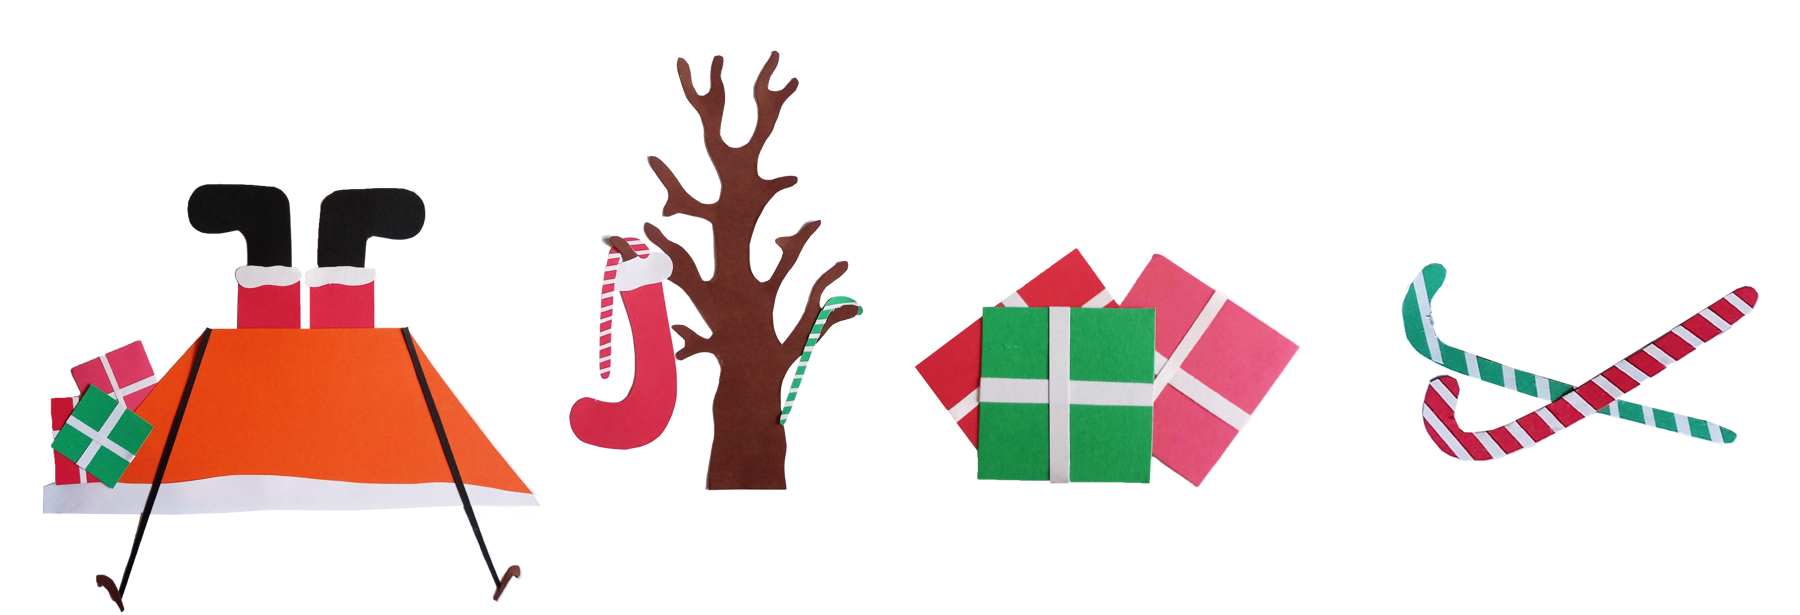 The images shows 4 different Christmas images made out of coloured paper card. On the left there's Santa's legs appearing upside down out the top of a tent, a brown tree trunk with candy canes and a stocking hanging off the branches, green and red presents with white ribbon, and green and red candy canes.